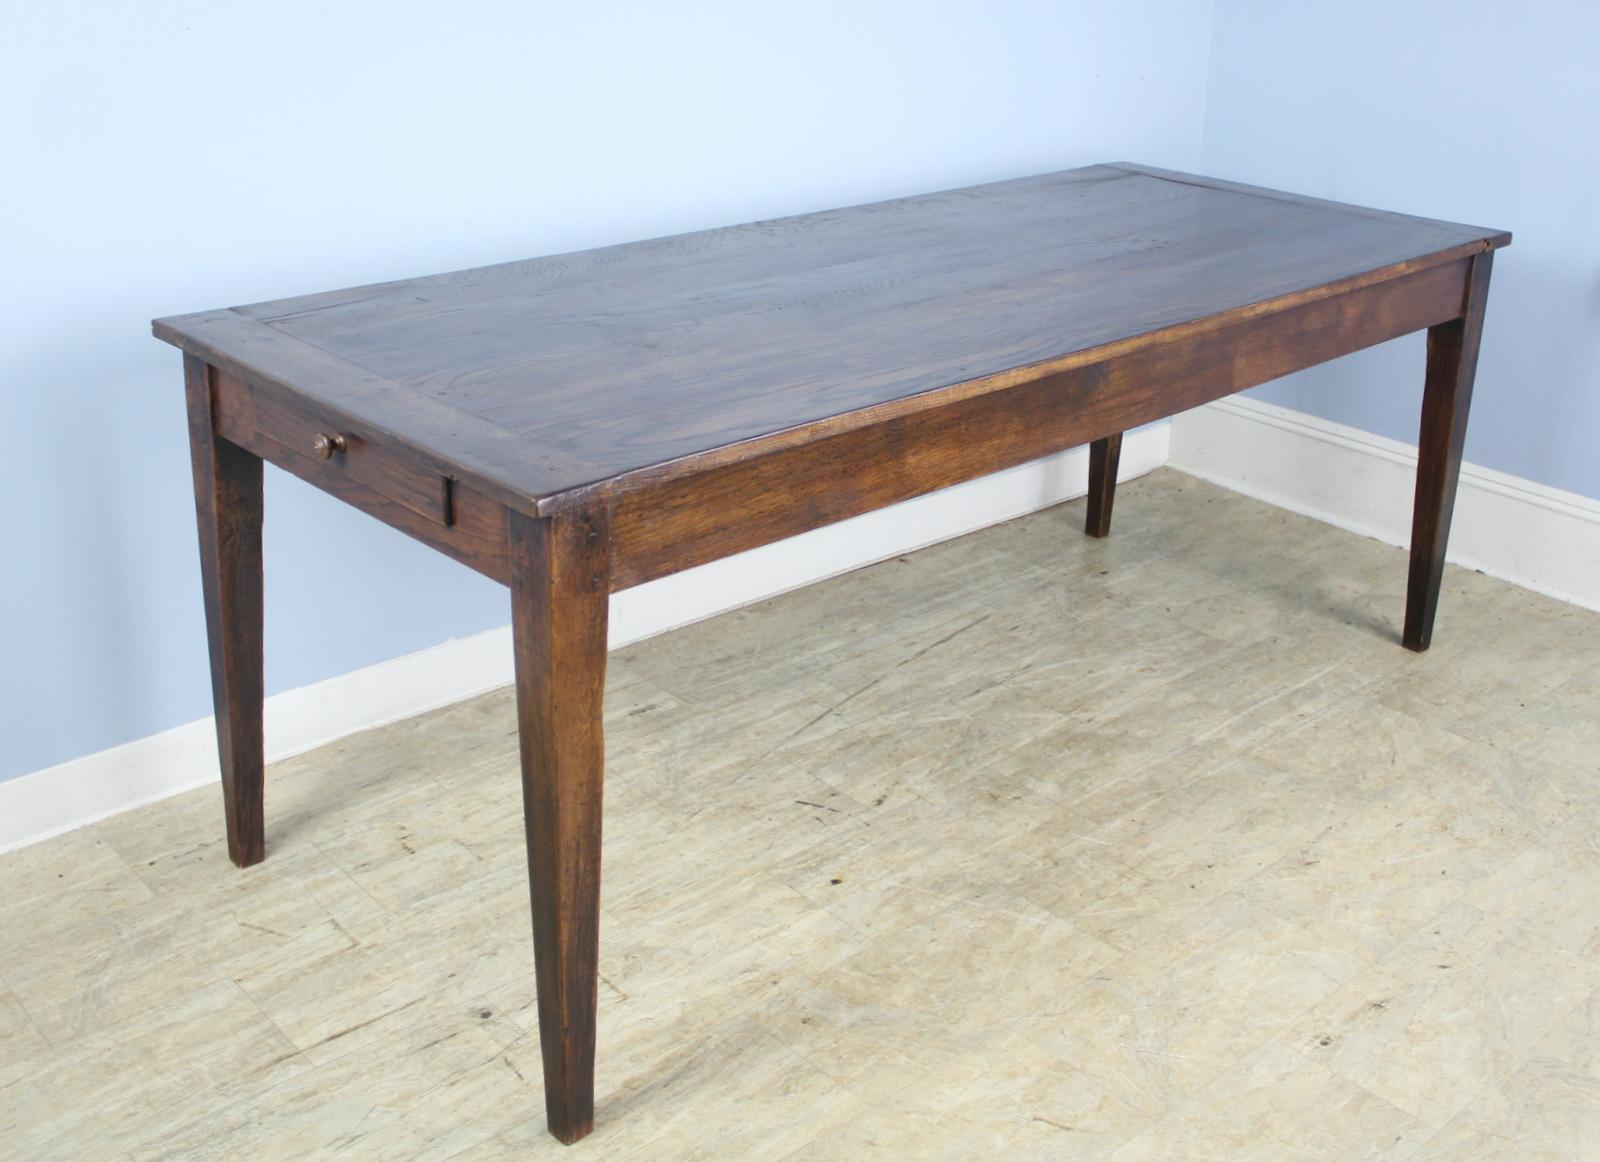 A simple classic chestnut farm table with beautiful grain and patina. Good tapered legs and breadboard ends. The apron height of 25 inches is generous for knees and there are 73.5 inches between the legs on the long side.